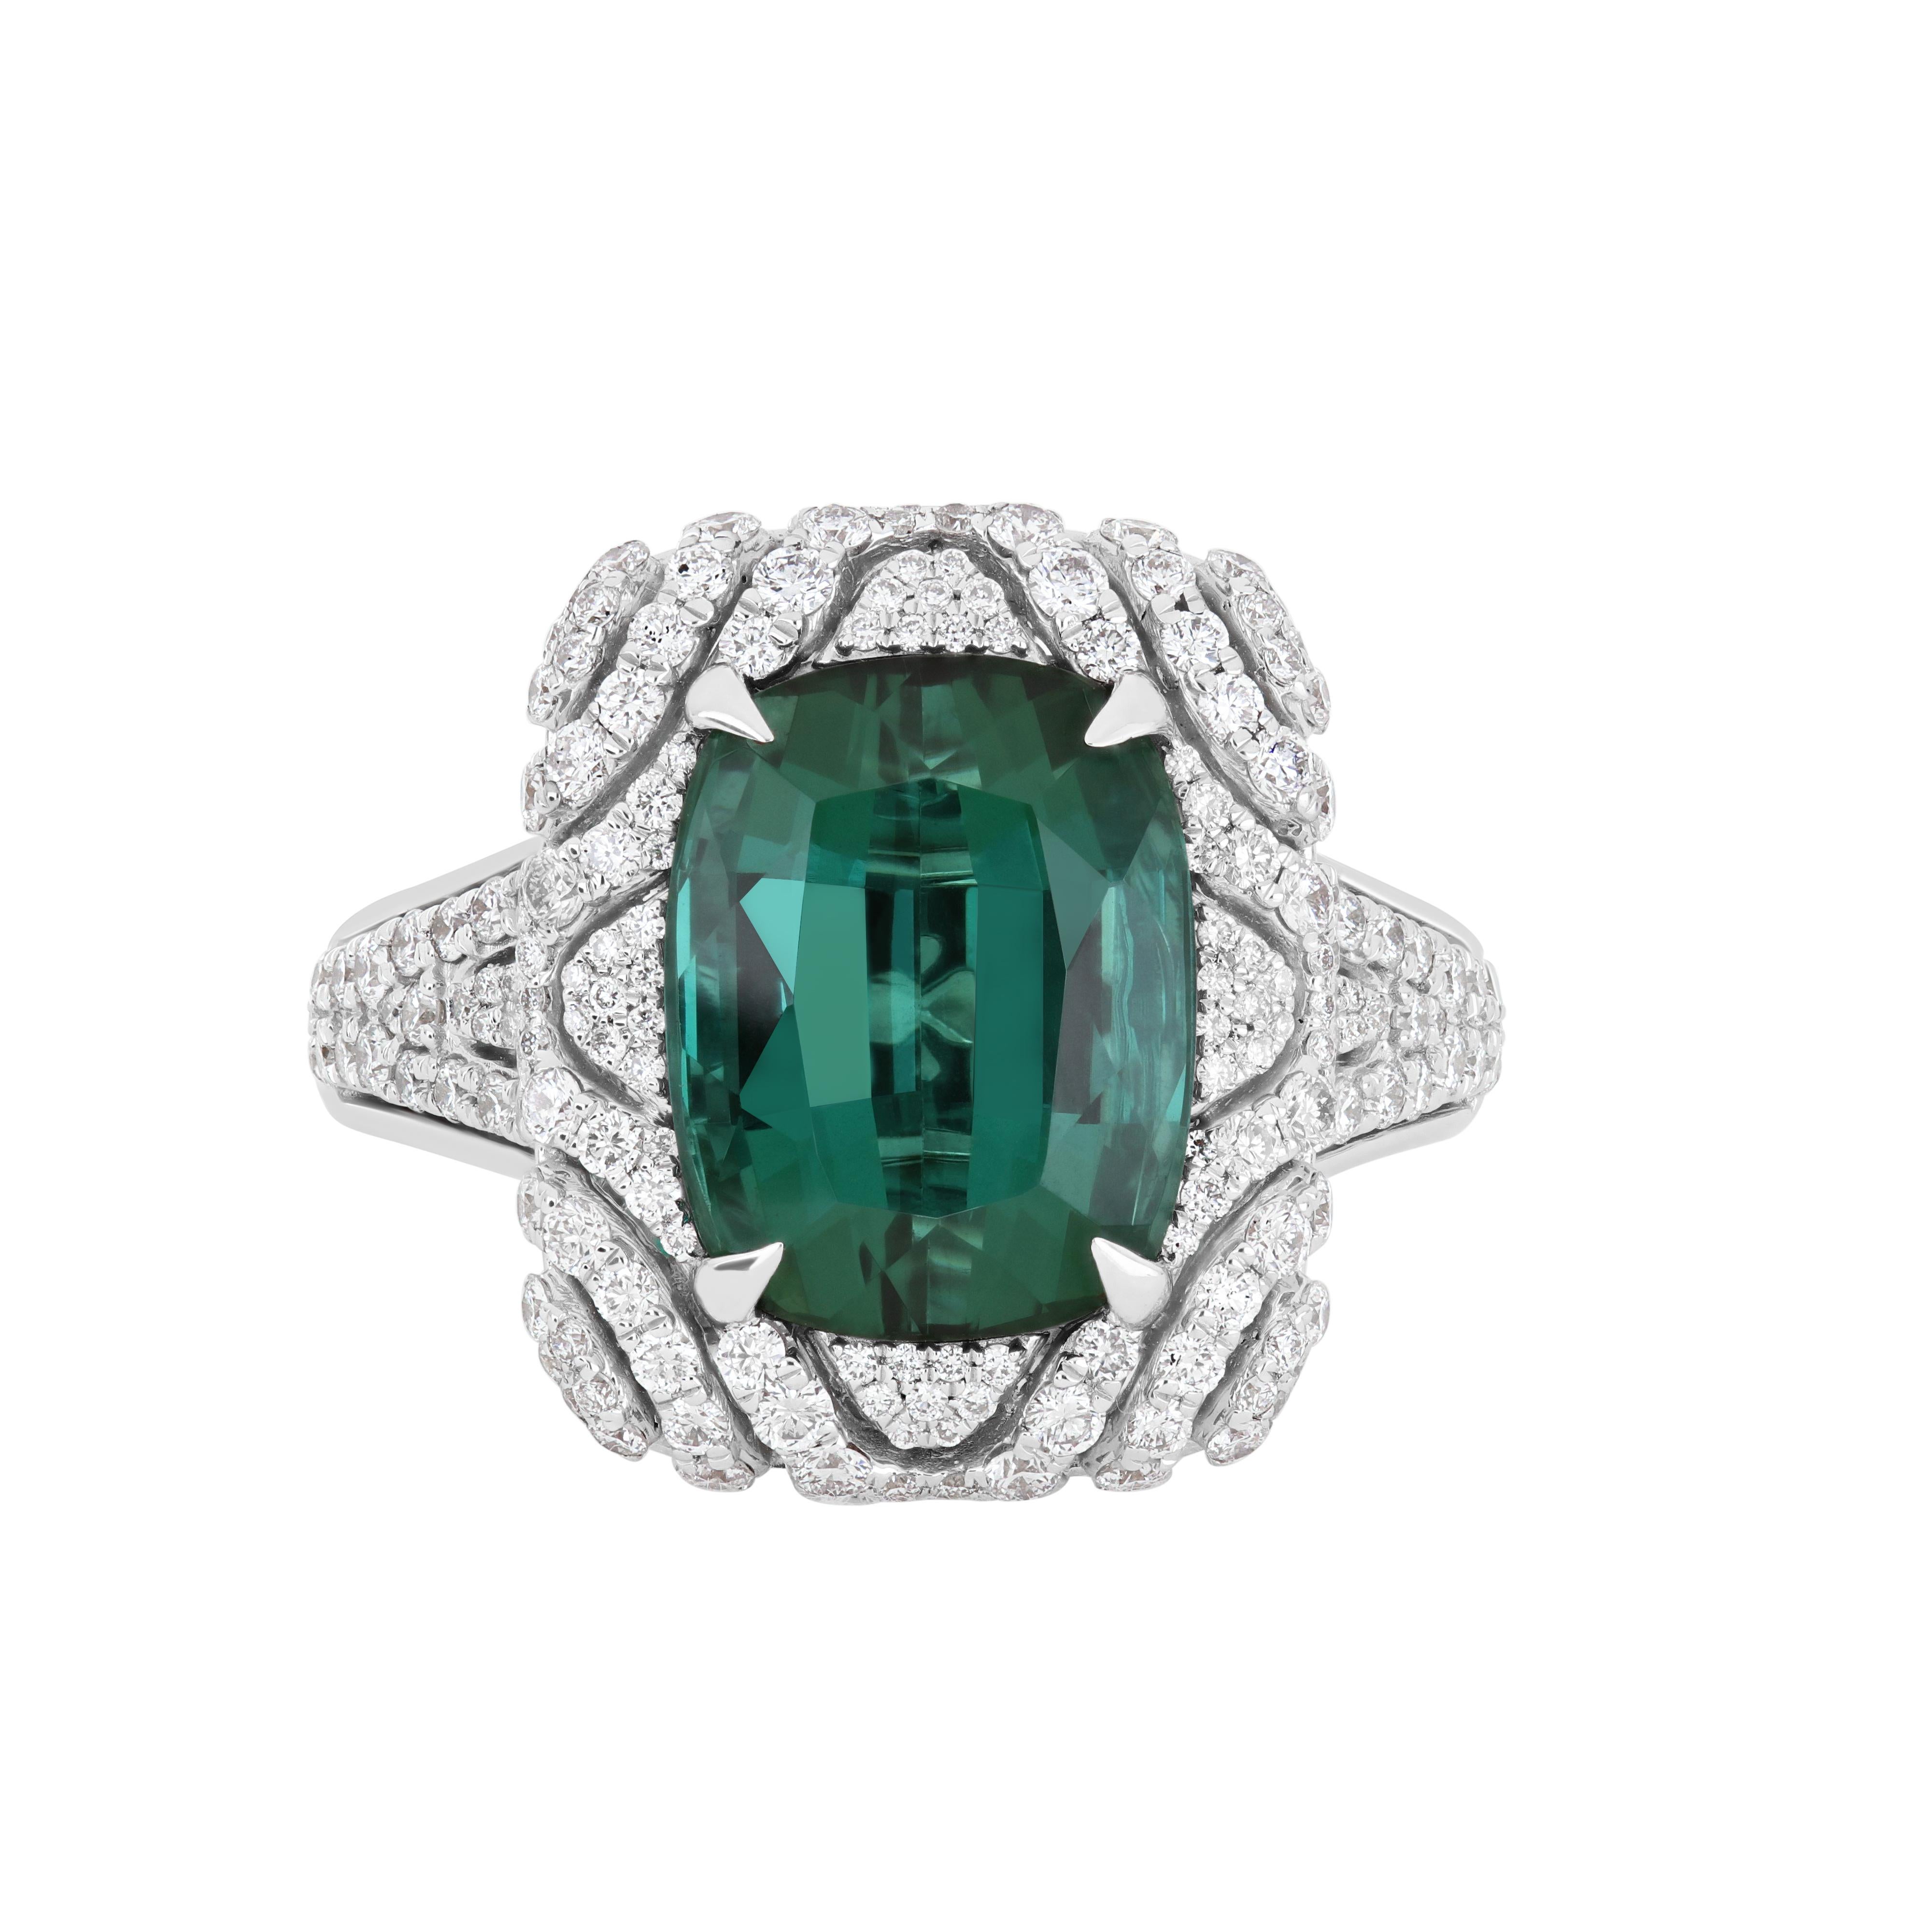 8.7 Carat Green Tourmaline and Diamond Studded Ring in 18K White Gold For Sale 1